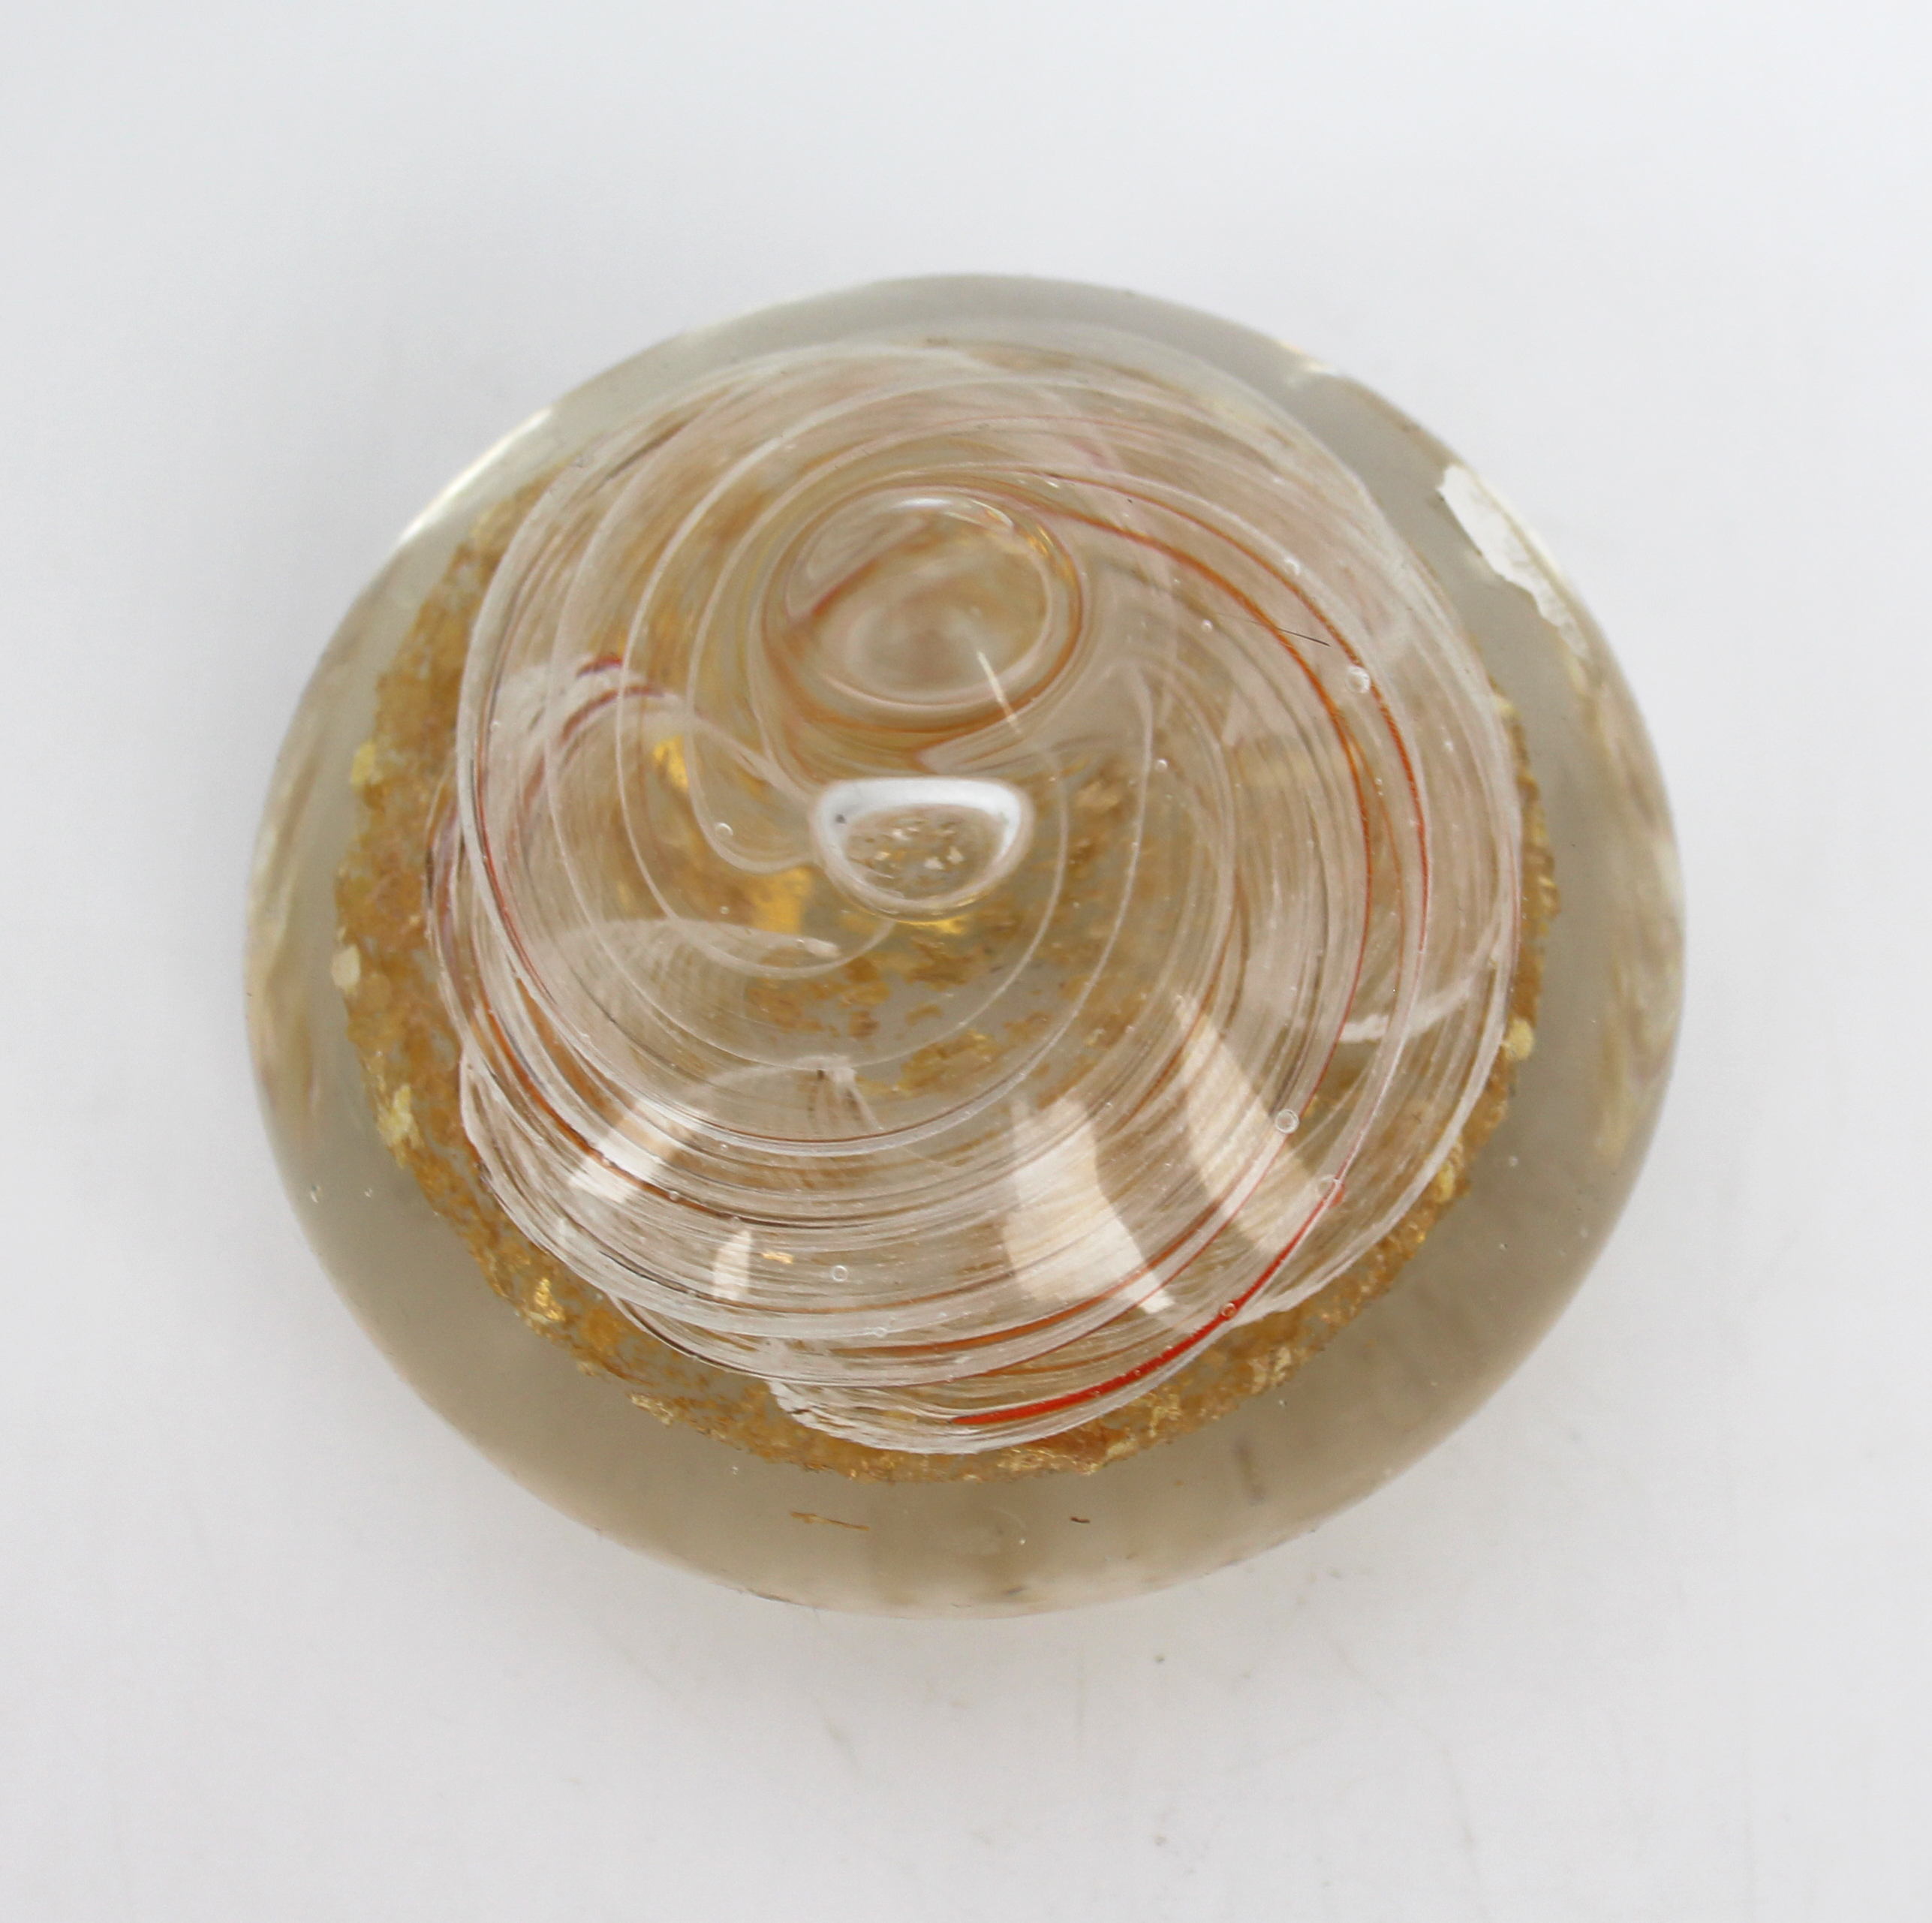 Vintage Glass Paperweight - Image 2 of 2